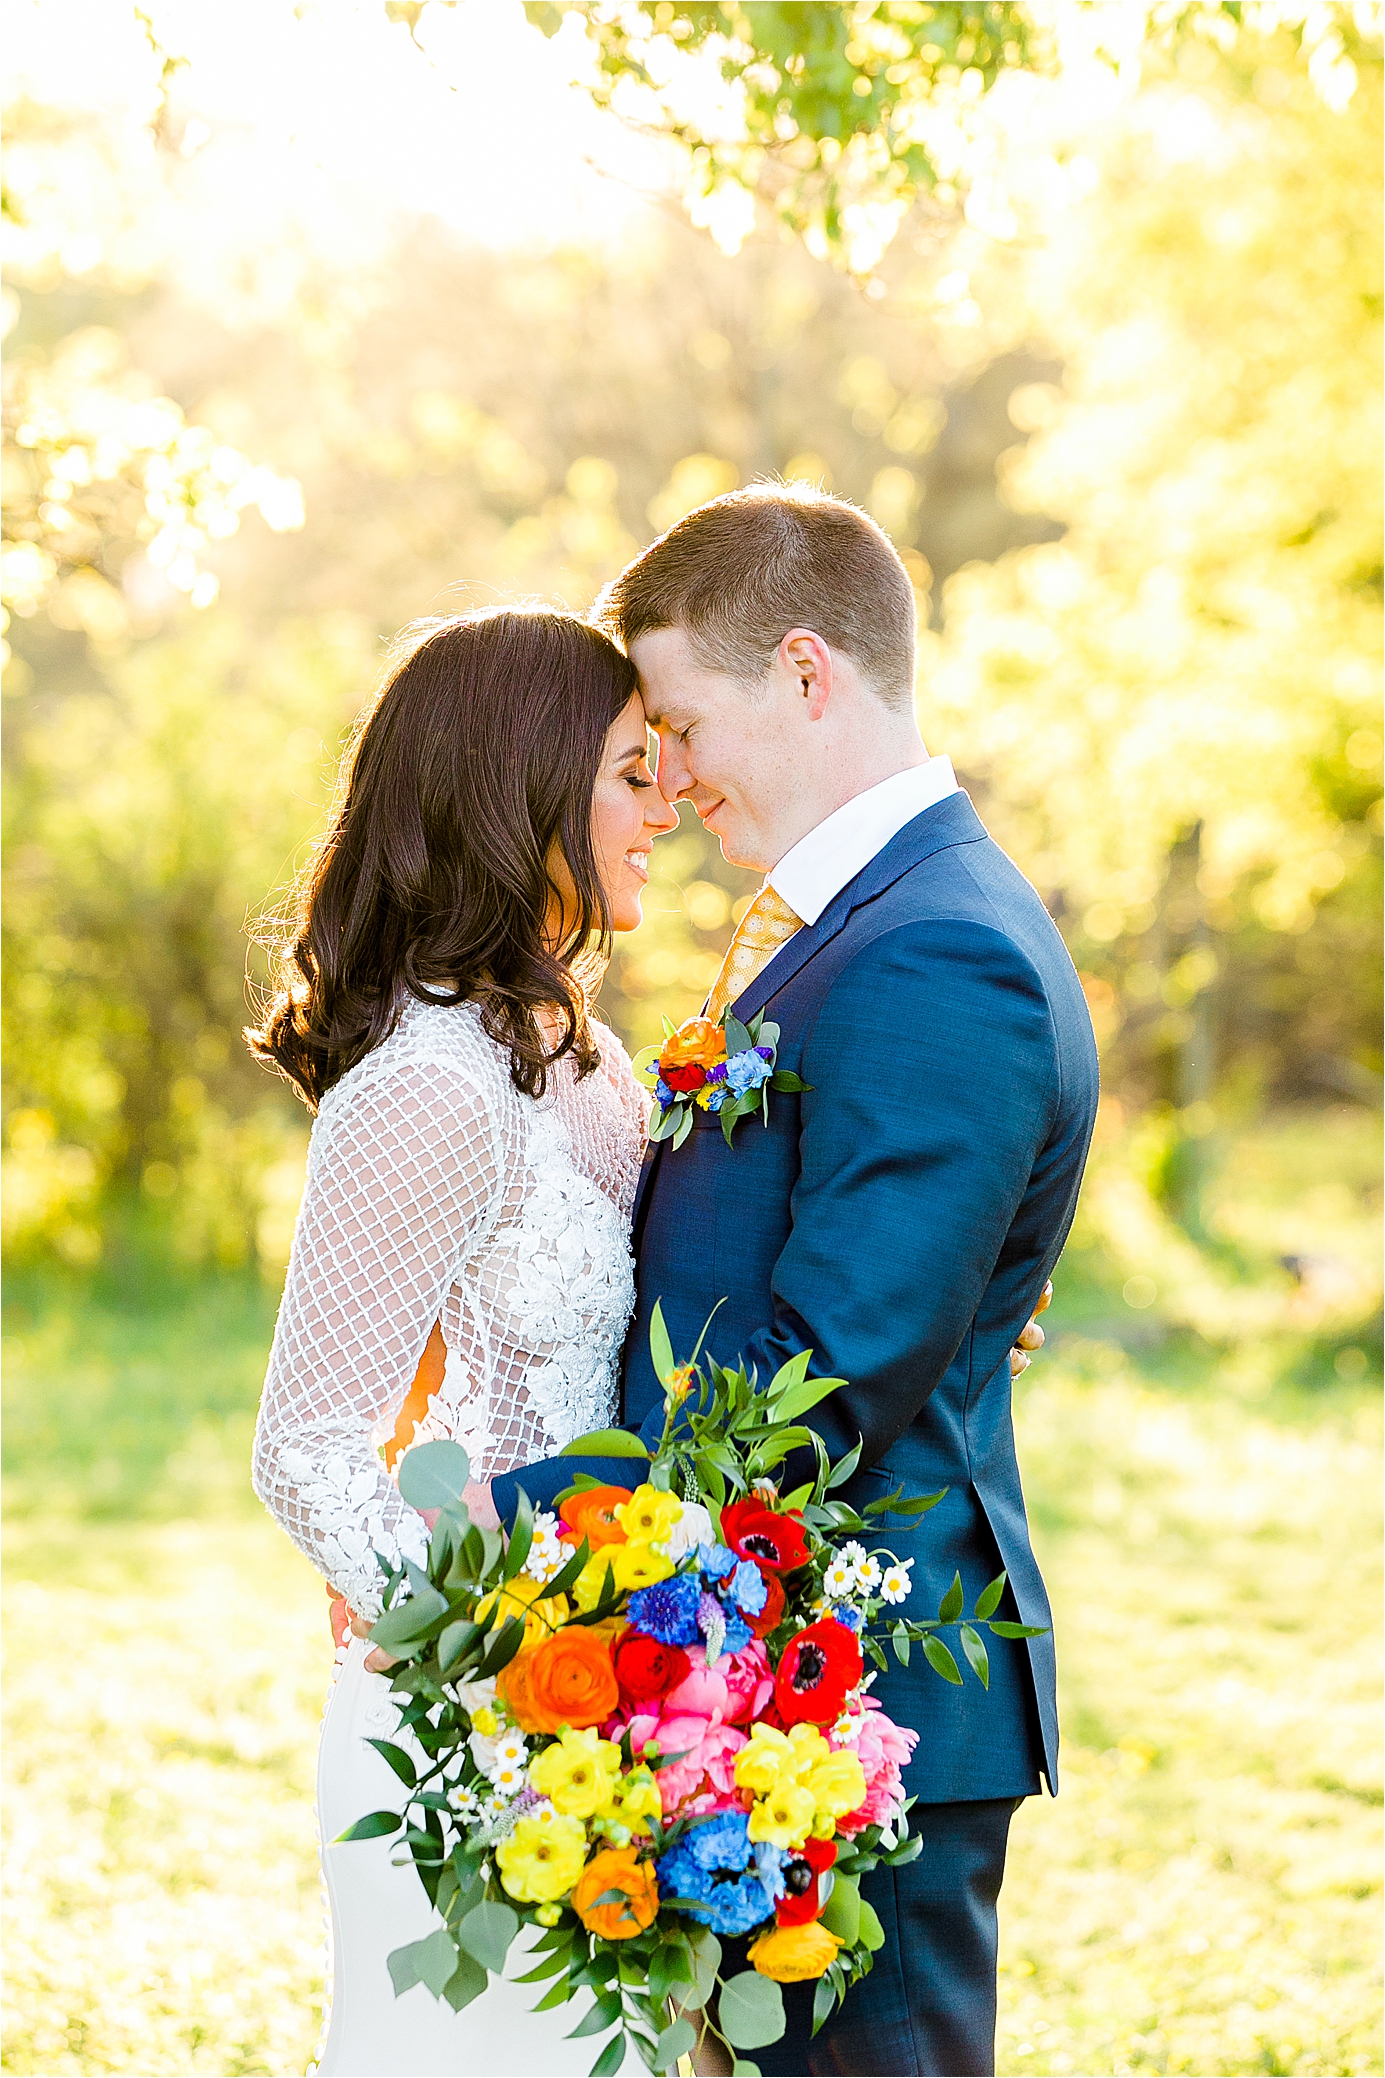 A couple embraces with the golden light behind them during their wedding day portraits with Hill Country Wedding Photographer Jillian Hogan 